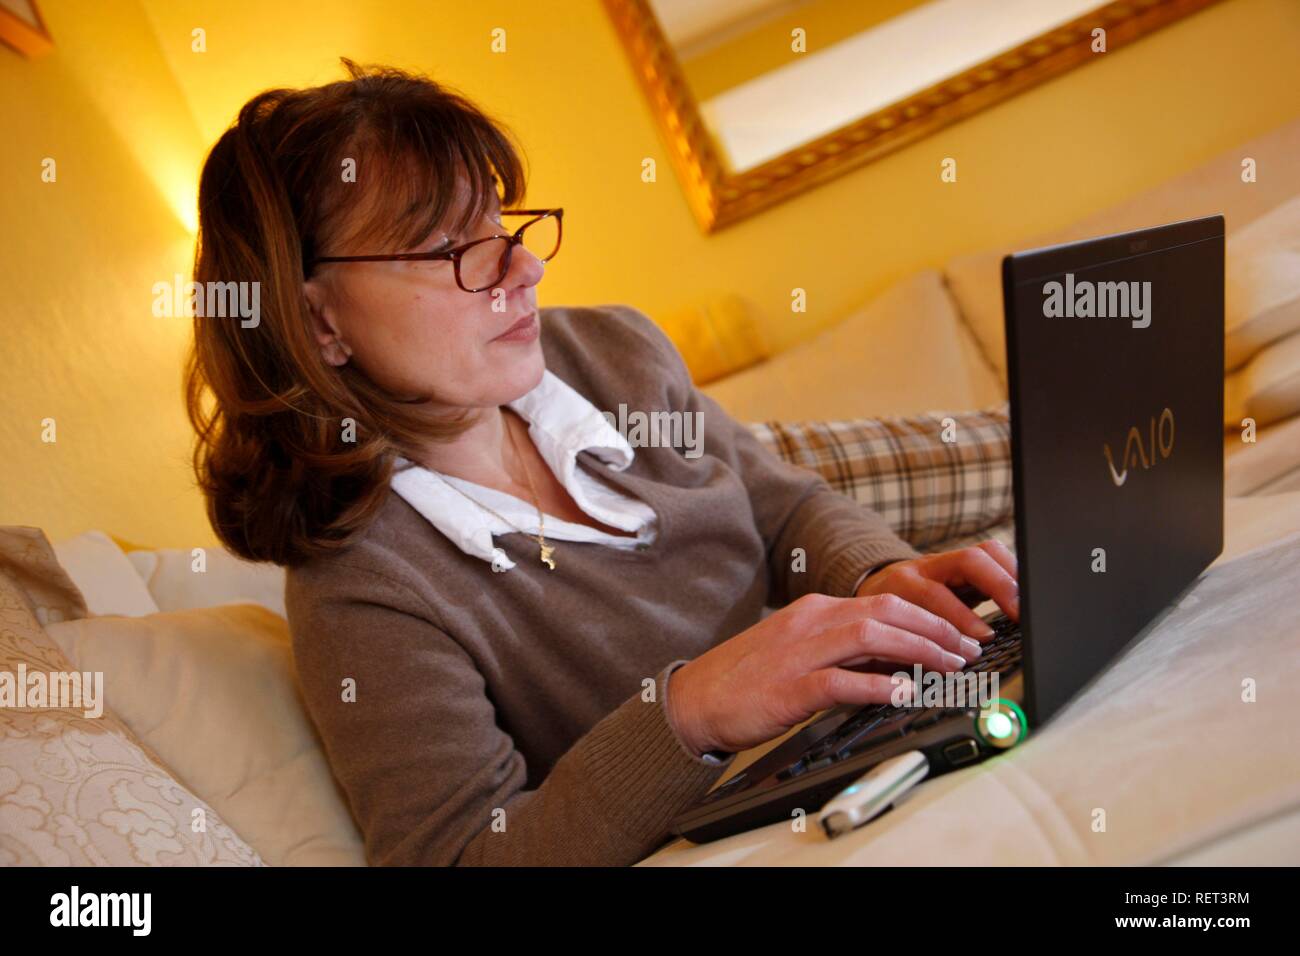 Woman, 45 years old, surfing the internet with a laptop on a sofa, DSL-stick, mobile internet Stock Photo